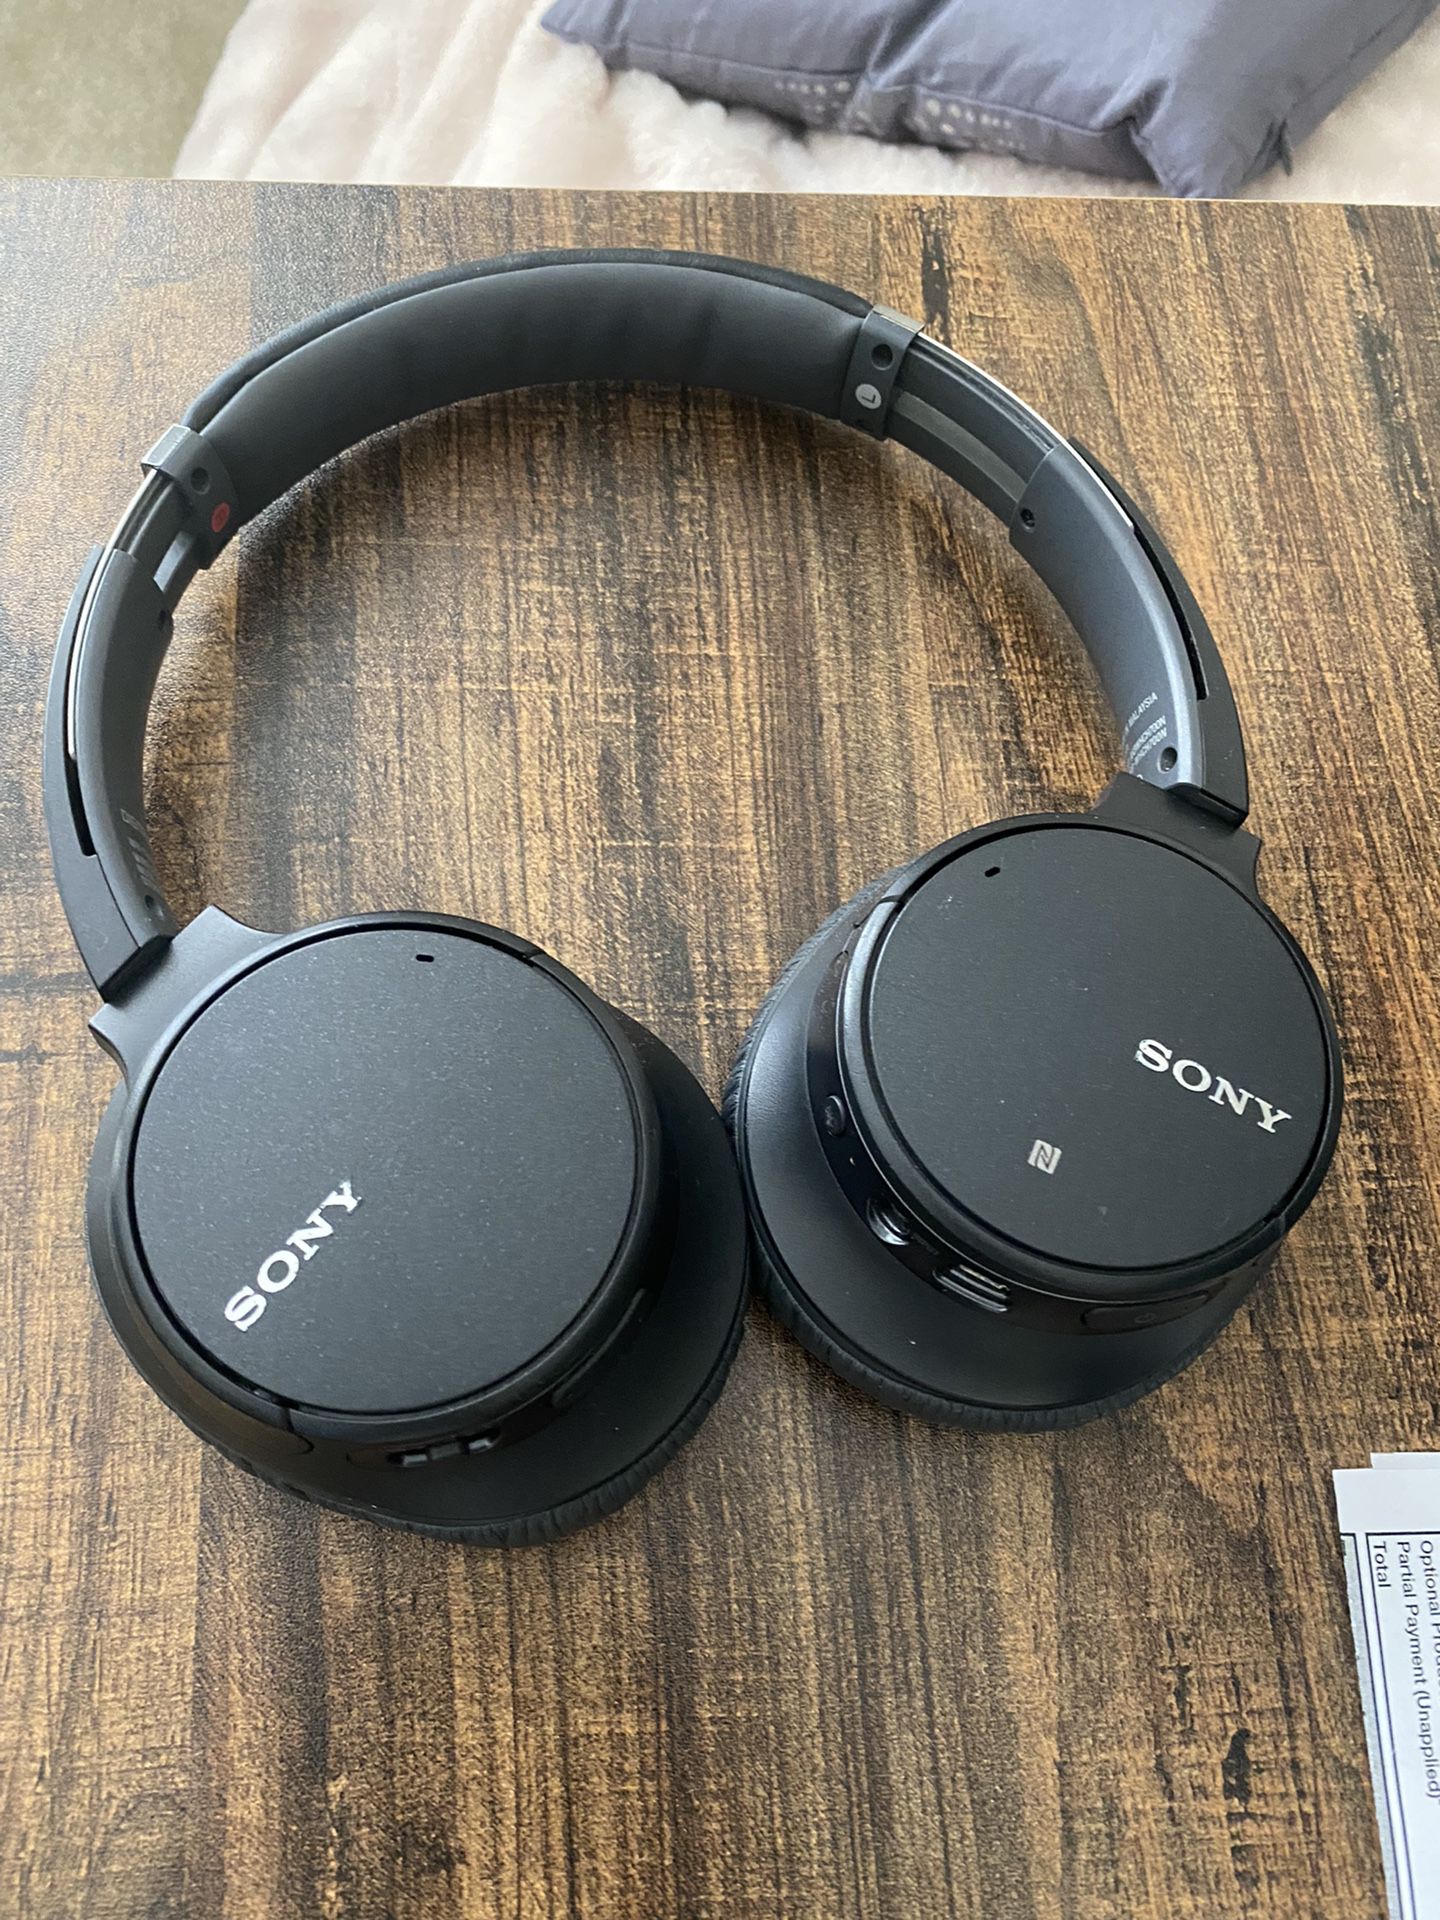 Sony Bluetooth Headphones,  classic over The Ear.  Noise Cancelling and Loud! Great Condition